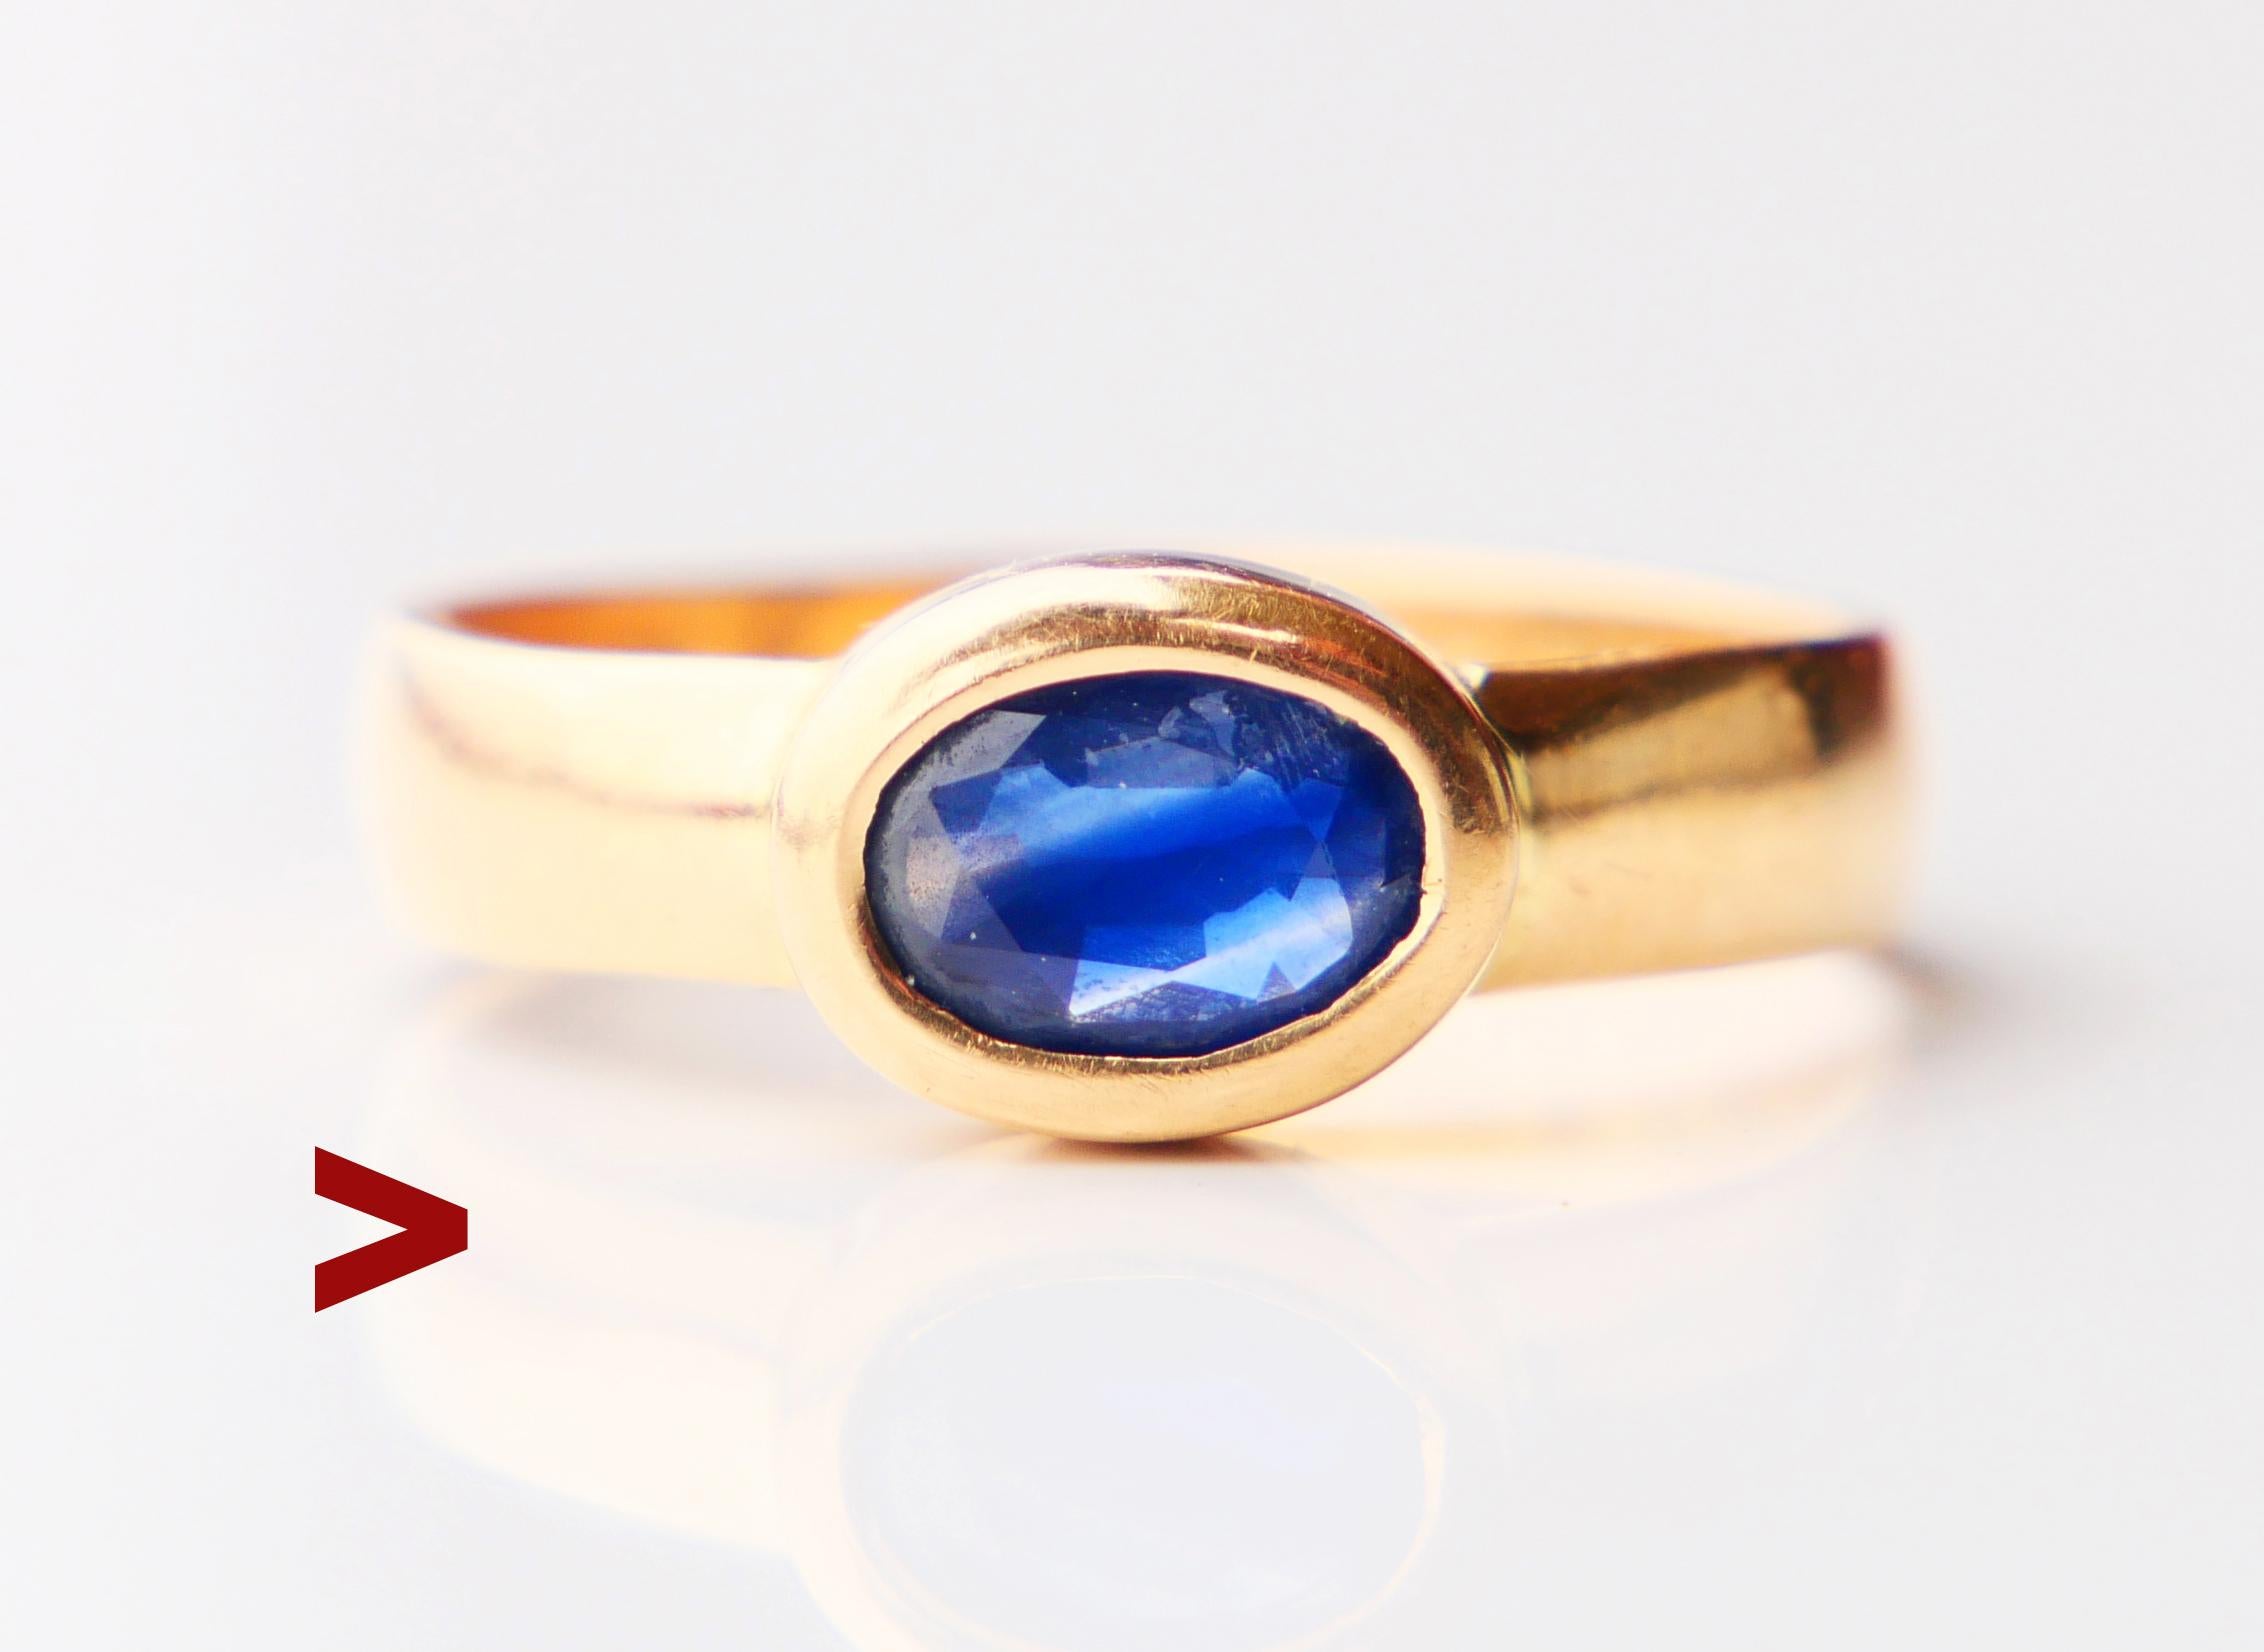 Ring for every day of unisex type in solid 18K Yellow Gold decorated with spectacular natural Blue Sapphire of Blue medium depth color, oval diamond cut 8 mm x 6 mm x 2.2 mm / ca. 1.55 ct. Stone demonstrates internal structure typical for natural